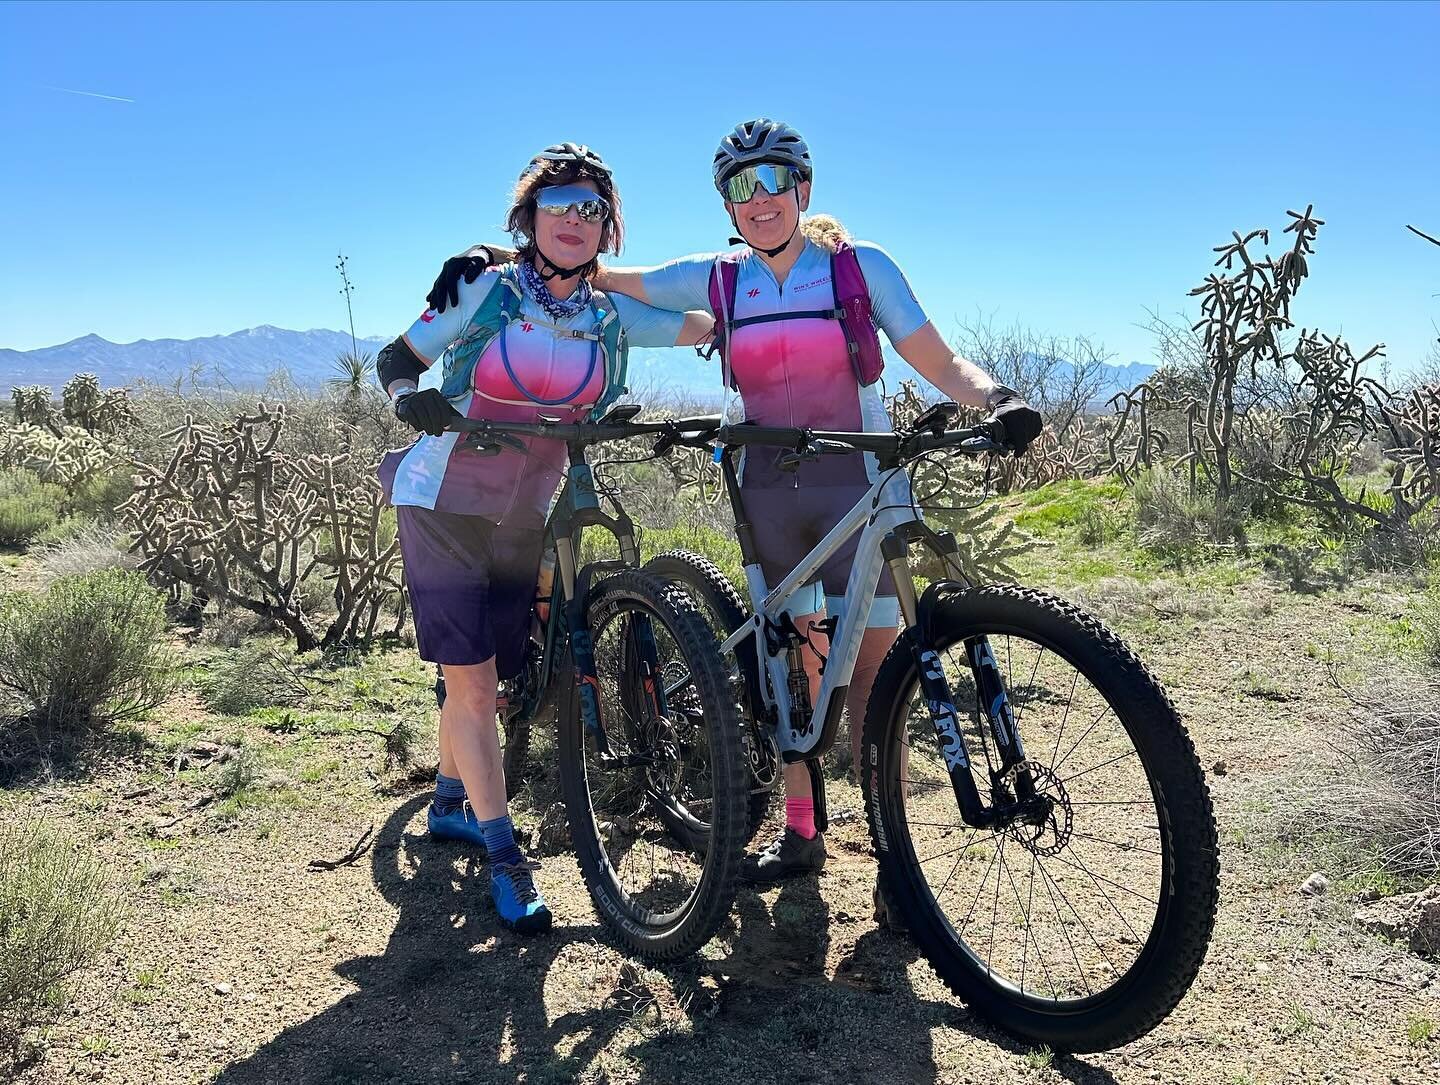 That was an EPIC 24 Hours In the Old Pueblo for the Win&rsquo;s Wheels Pink Pivot Power Duo Women&rsquo;s Team! Congrats to @timaripruis and @laureencoffelt for completing the most laps and fastest laps they have ever done @epicrides  #24hop to earn 